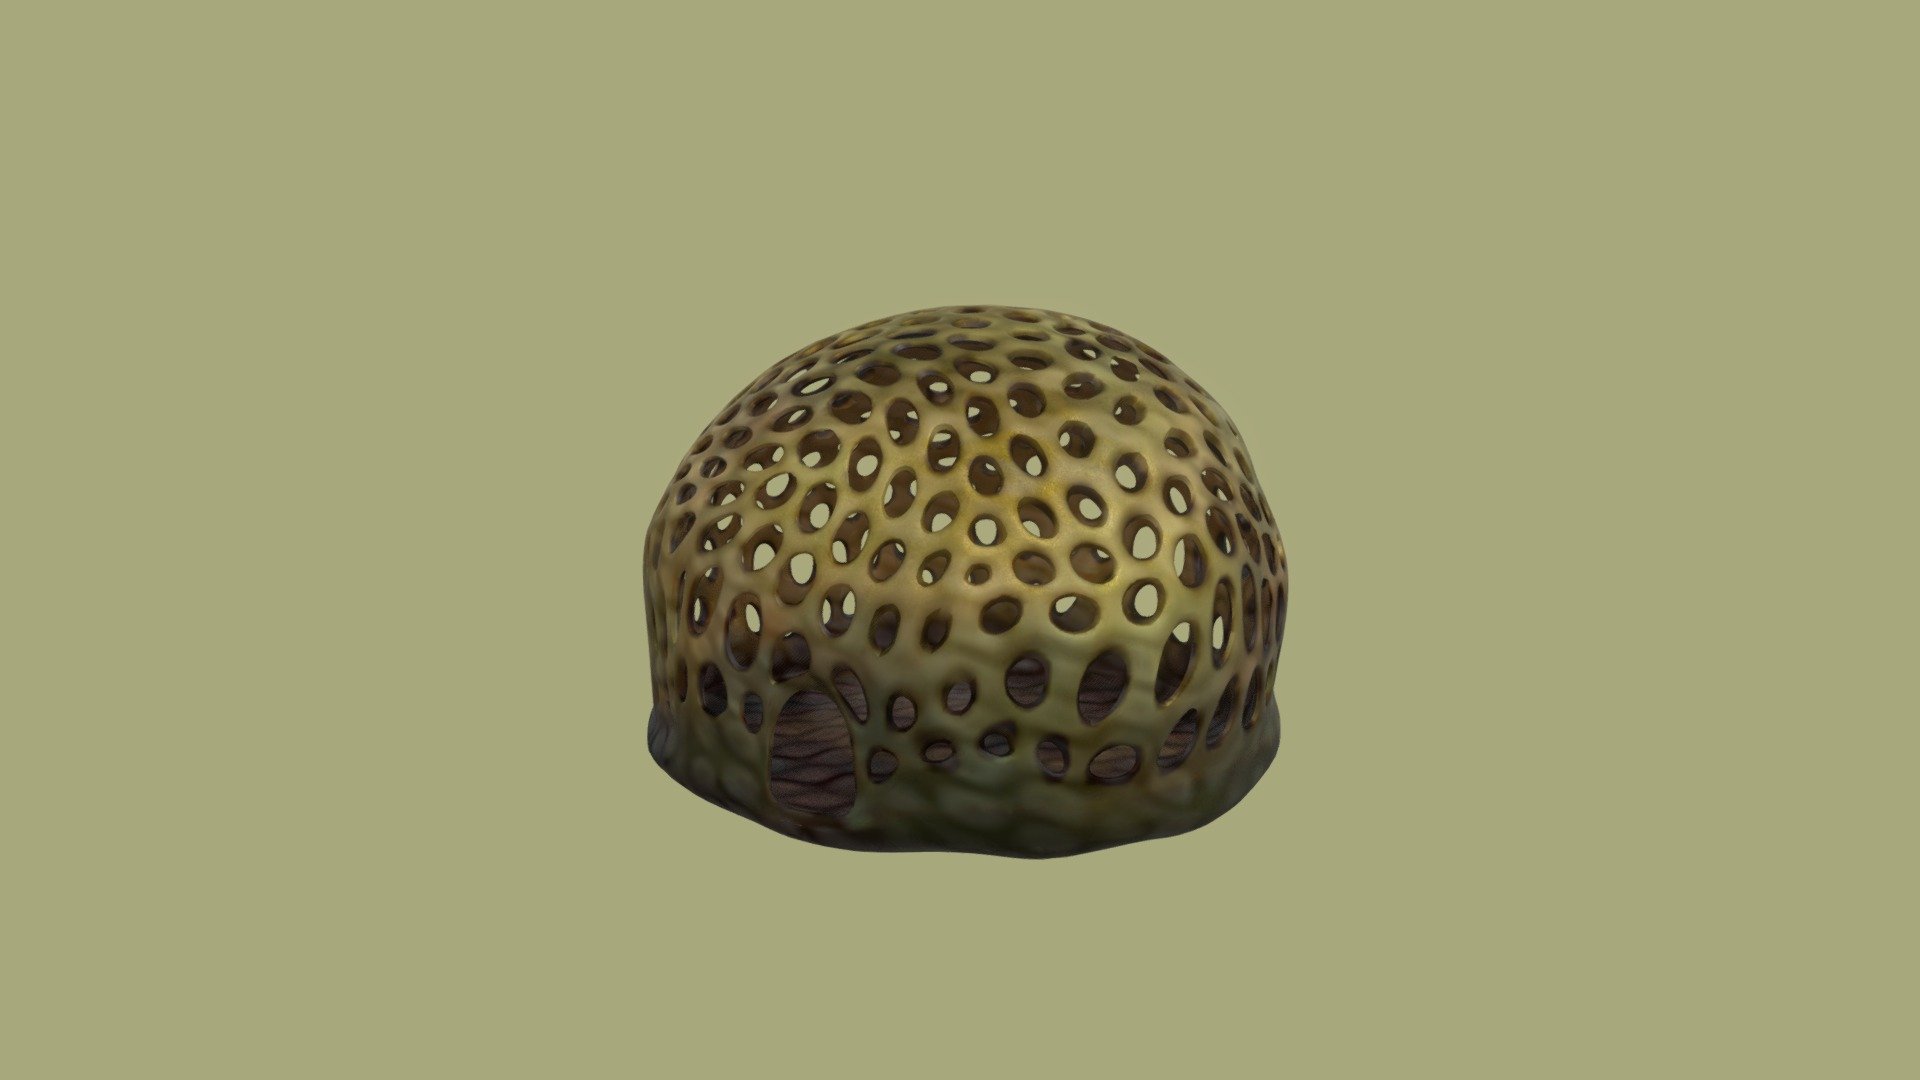 Its a mushroom where someone can live inside. It has some screwed up topology but I tested it in Unreal and it wasnt noticable, also uv map is not very good cause its my first attempt. But Its quite cute, hope someone can use it.

There is FBX and Blend in archive 3d model